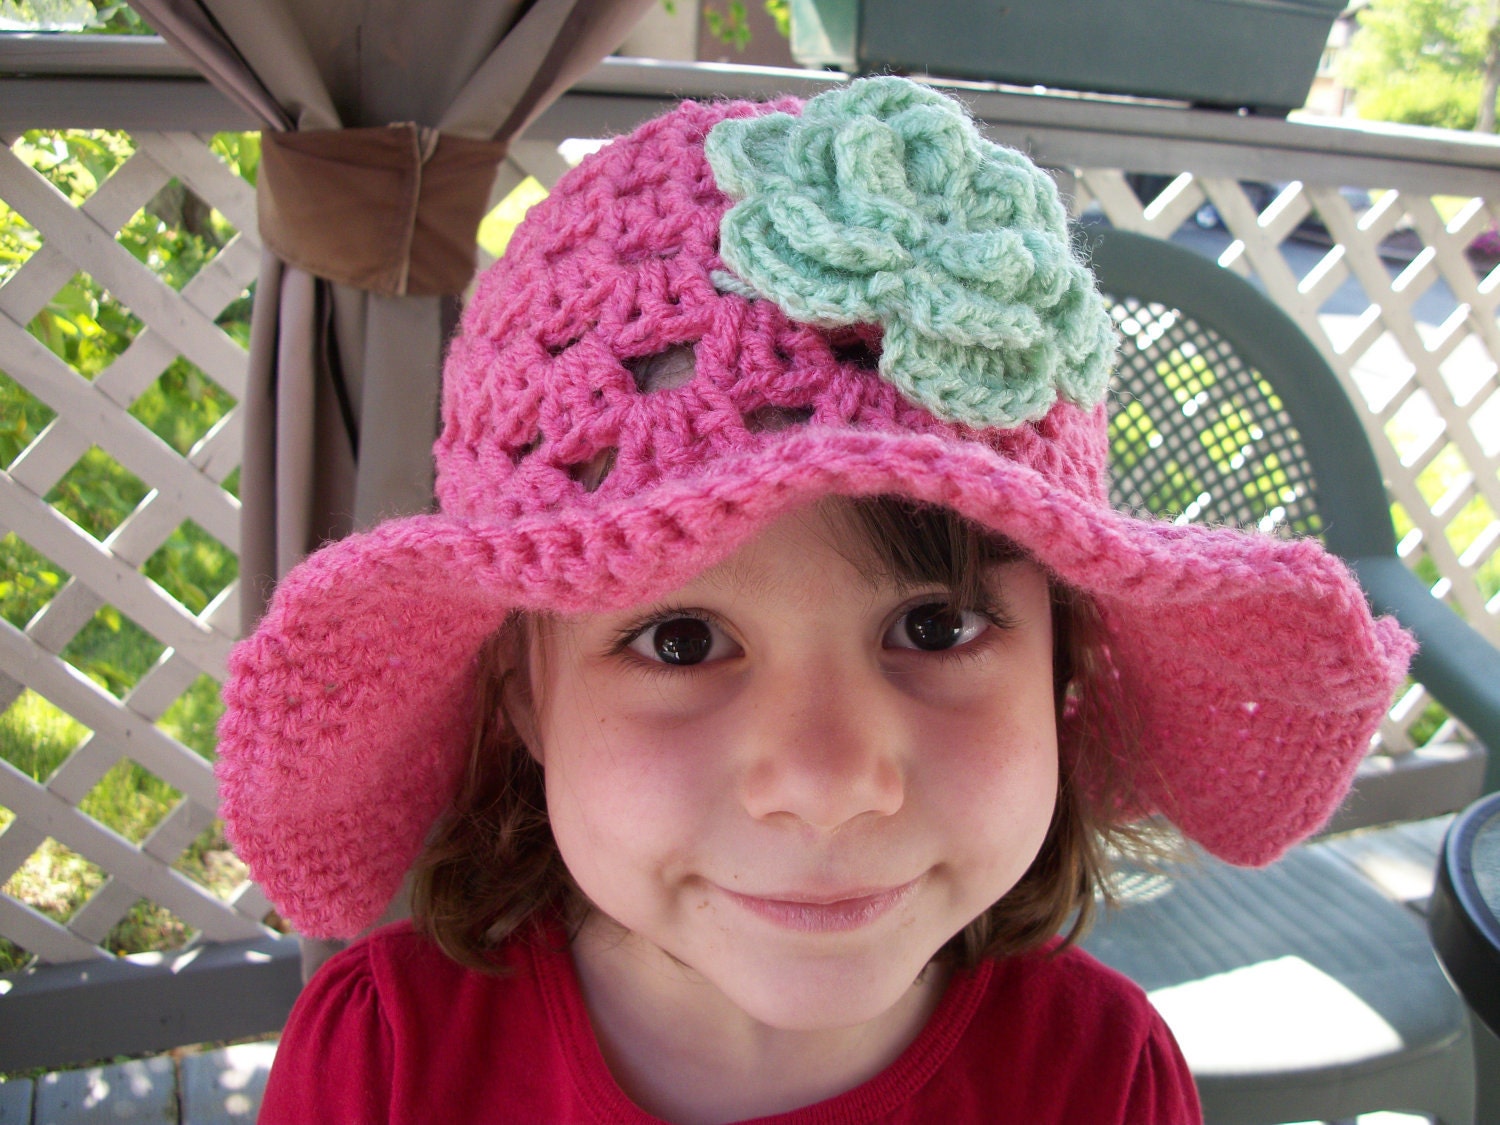 Summer Fling Sun Hat - Light Raspberry and Honeydew - Size 4-12 years with detachable flower clip